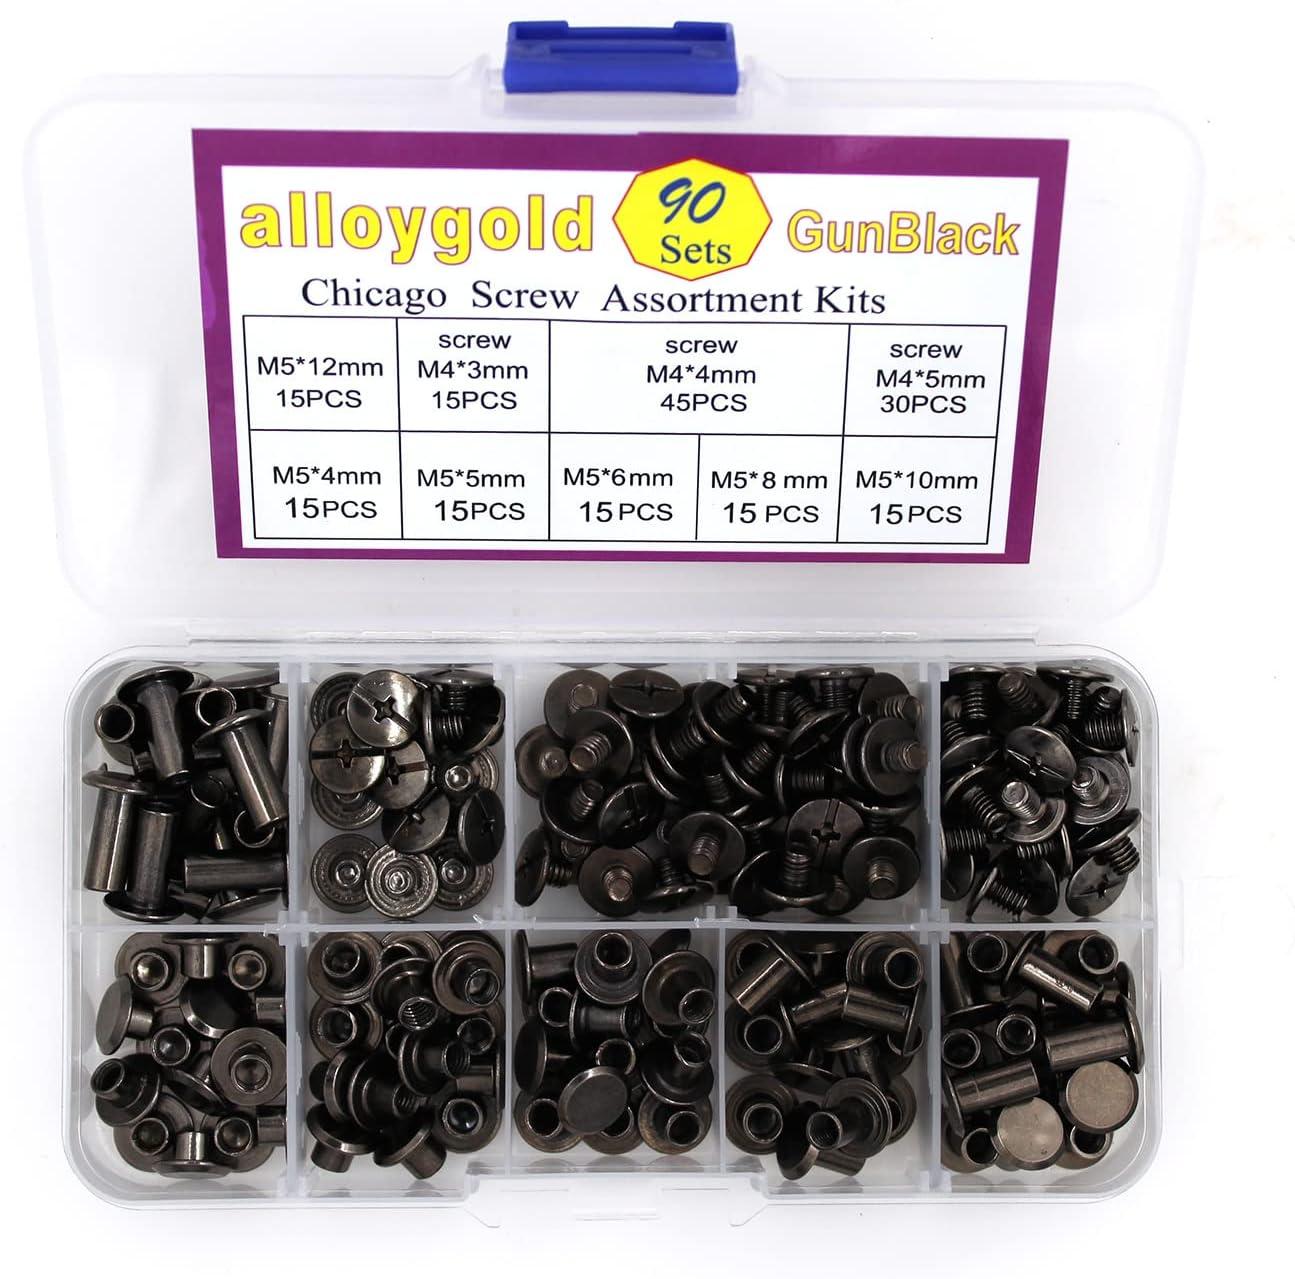 90 Sets Black Chicago Screw Leather Assorted Kit 6 Sizes of Screw Rivets  for Leather Rivet for DIY Leather Craft and Bookbinding (M5 X 4 5 6 8 10  12) Gun Black M5*4/5/6/8/10/12mm